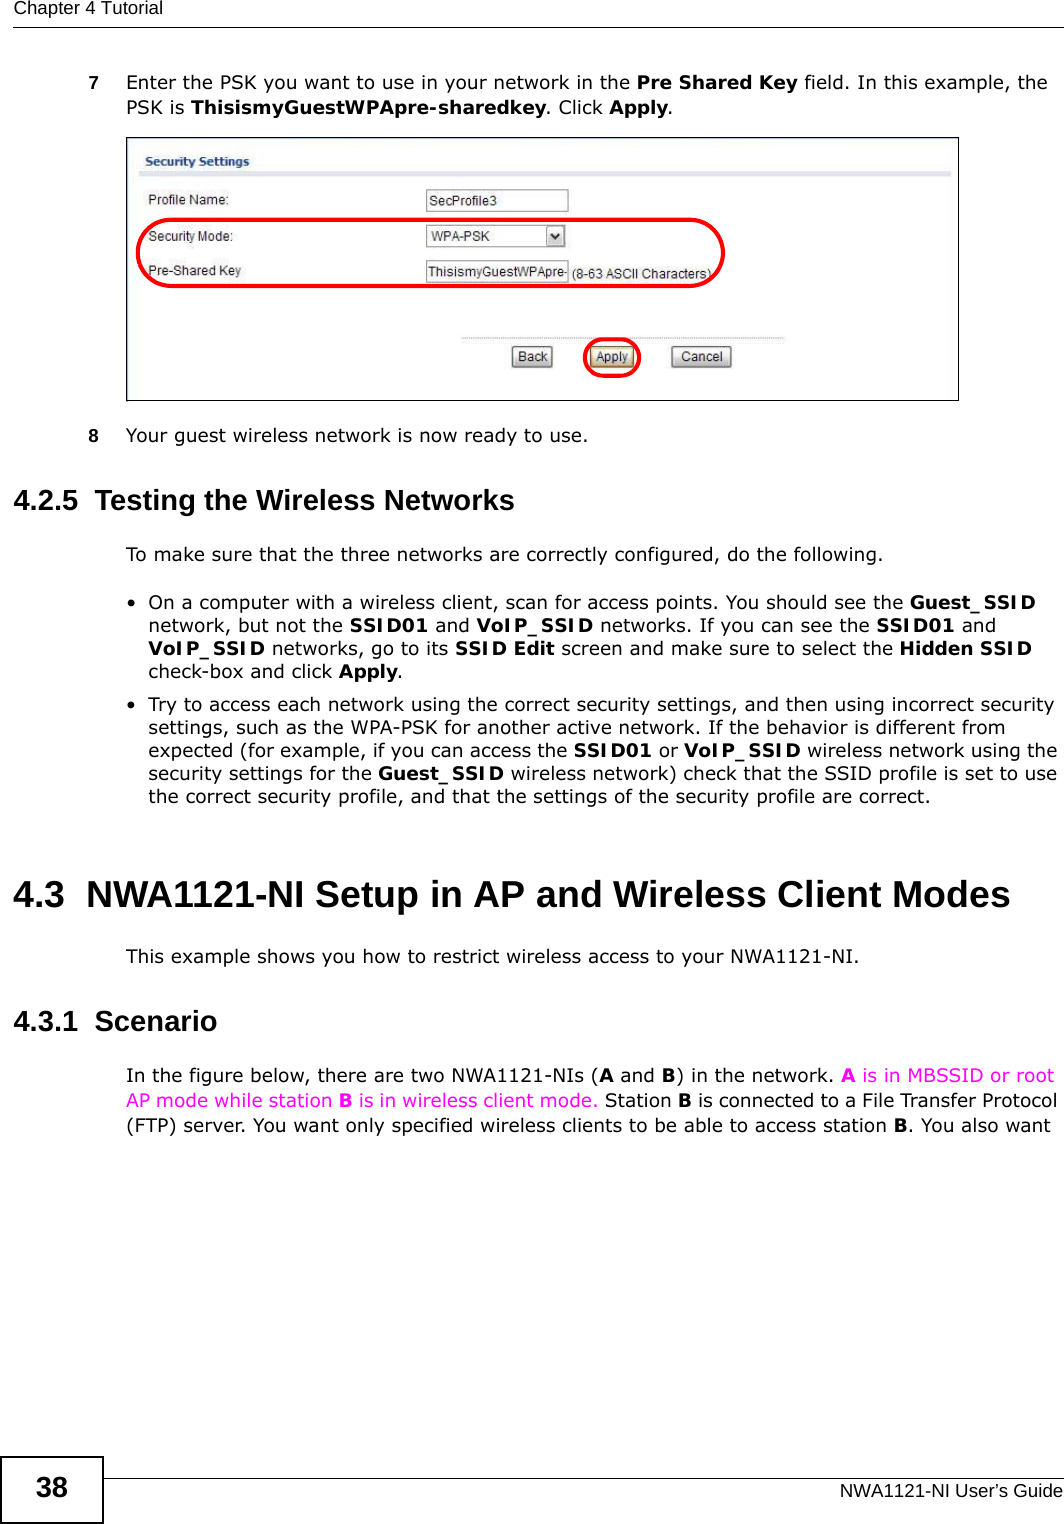 Chapter 4 TutorialNWA1121-NI User’s Guide387Enter the PSK you want to use in your network in the Pre Shared Key field. In this example, the PSK is ThisismyGuestWPApre-sharedkey. Click Apply. 8Your guest wireless network is now ready to use.4.2.5  Testing the Wireless NetworksTo make sure that the three networks are correctly configured, do the following.• On a computer with a wireless client, scan for access points. You should see the Guest_SSID network, but not the SSID01 and VoIP_SSID networks. If you can see the SSID01 and VoIP_SSID networks, go to its SSID Edit screen and make sure to select the Hidden SSID check-box and click Apply.• Try to access each network using the correct security settings, and then using incorrect security settings, such as the WPA-PSK for another active network. If the behavior is different from expected (for example, if you can access the SSID01 or VoIP_SSID wireless network using the security settings for the Guest_SSID wireless network) check that the SSID profile is set to use the correct security profile, and that the settings of the security profile are correct.4.3  NWA1121-NI Setup in AP and Wireless Client ModesThis example shows you how to restrict wireless access to your NWA1121-NI.4.3.1  ScenarioIn the figure below, there are two NWA1121-NIs (A and B) in the network. A is in MBSSID or root AP mode while station B is in wireless client mode. Station B is connected to a File Transfer Protocol (FTP) server. You want only specified wireless clients to be able to access station B. You also want 